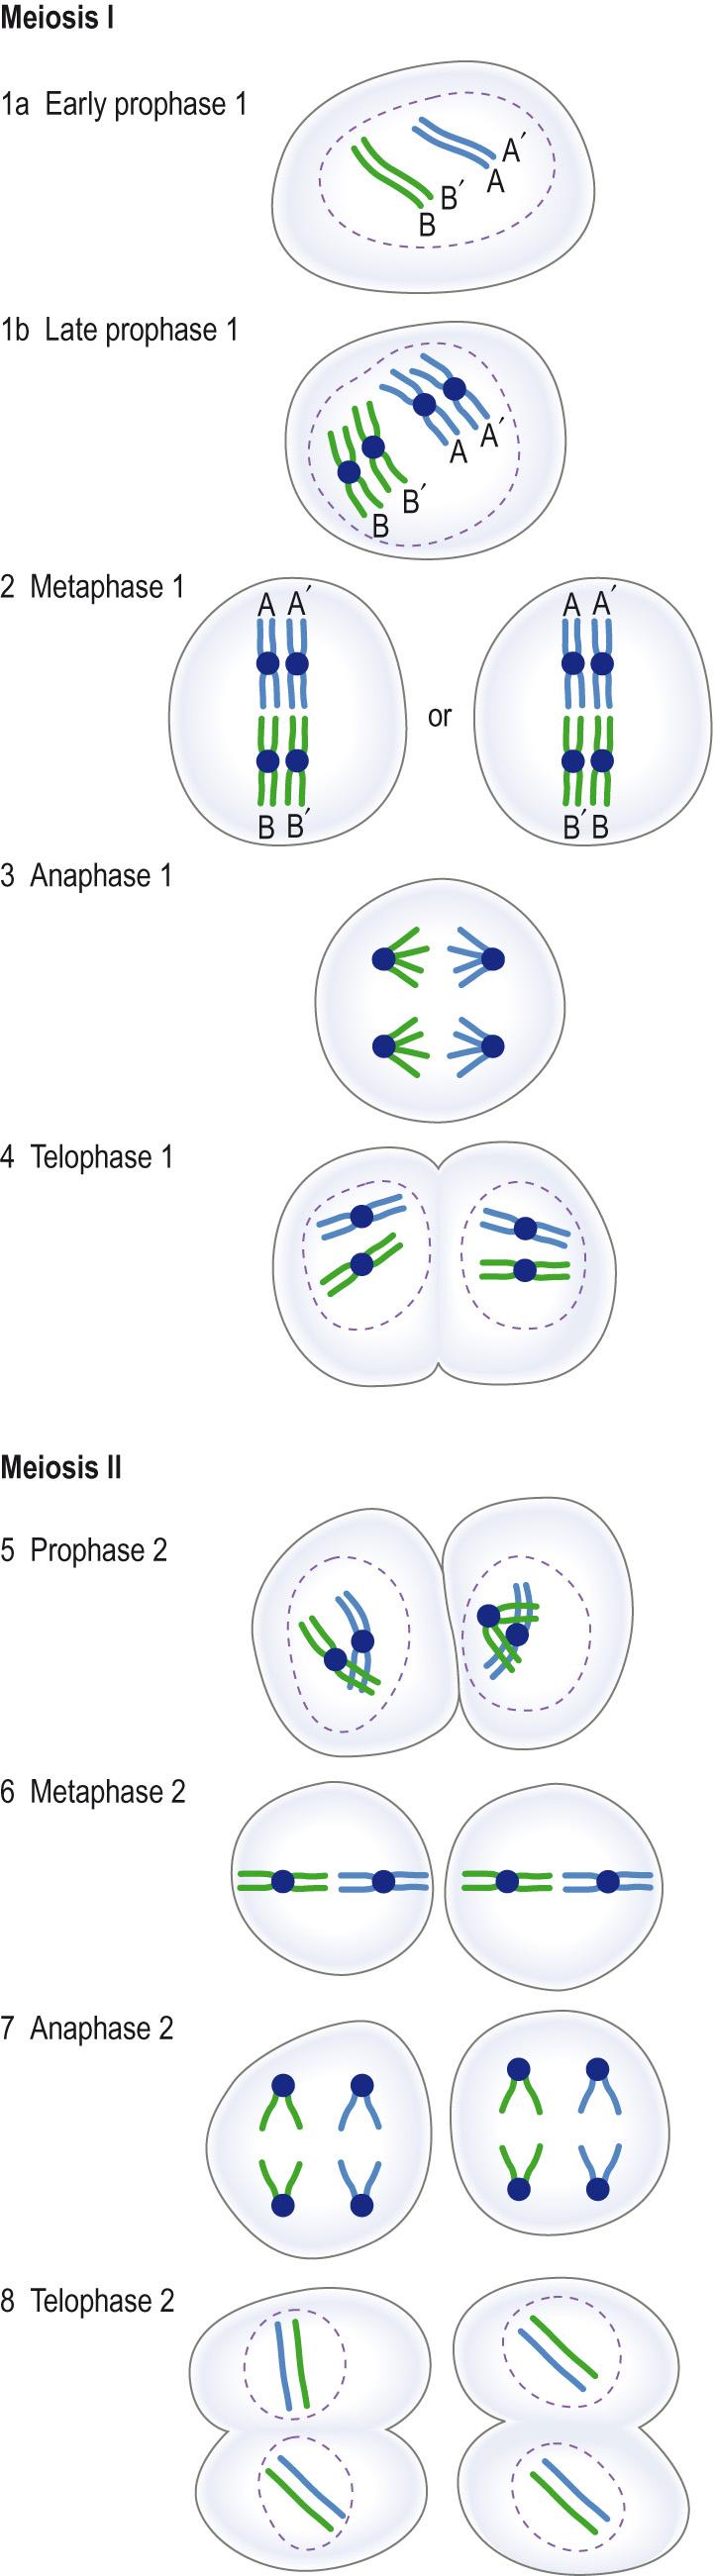 Fig. 5.6, Phases in meiosis.